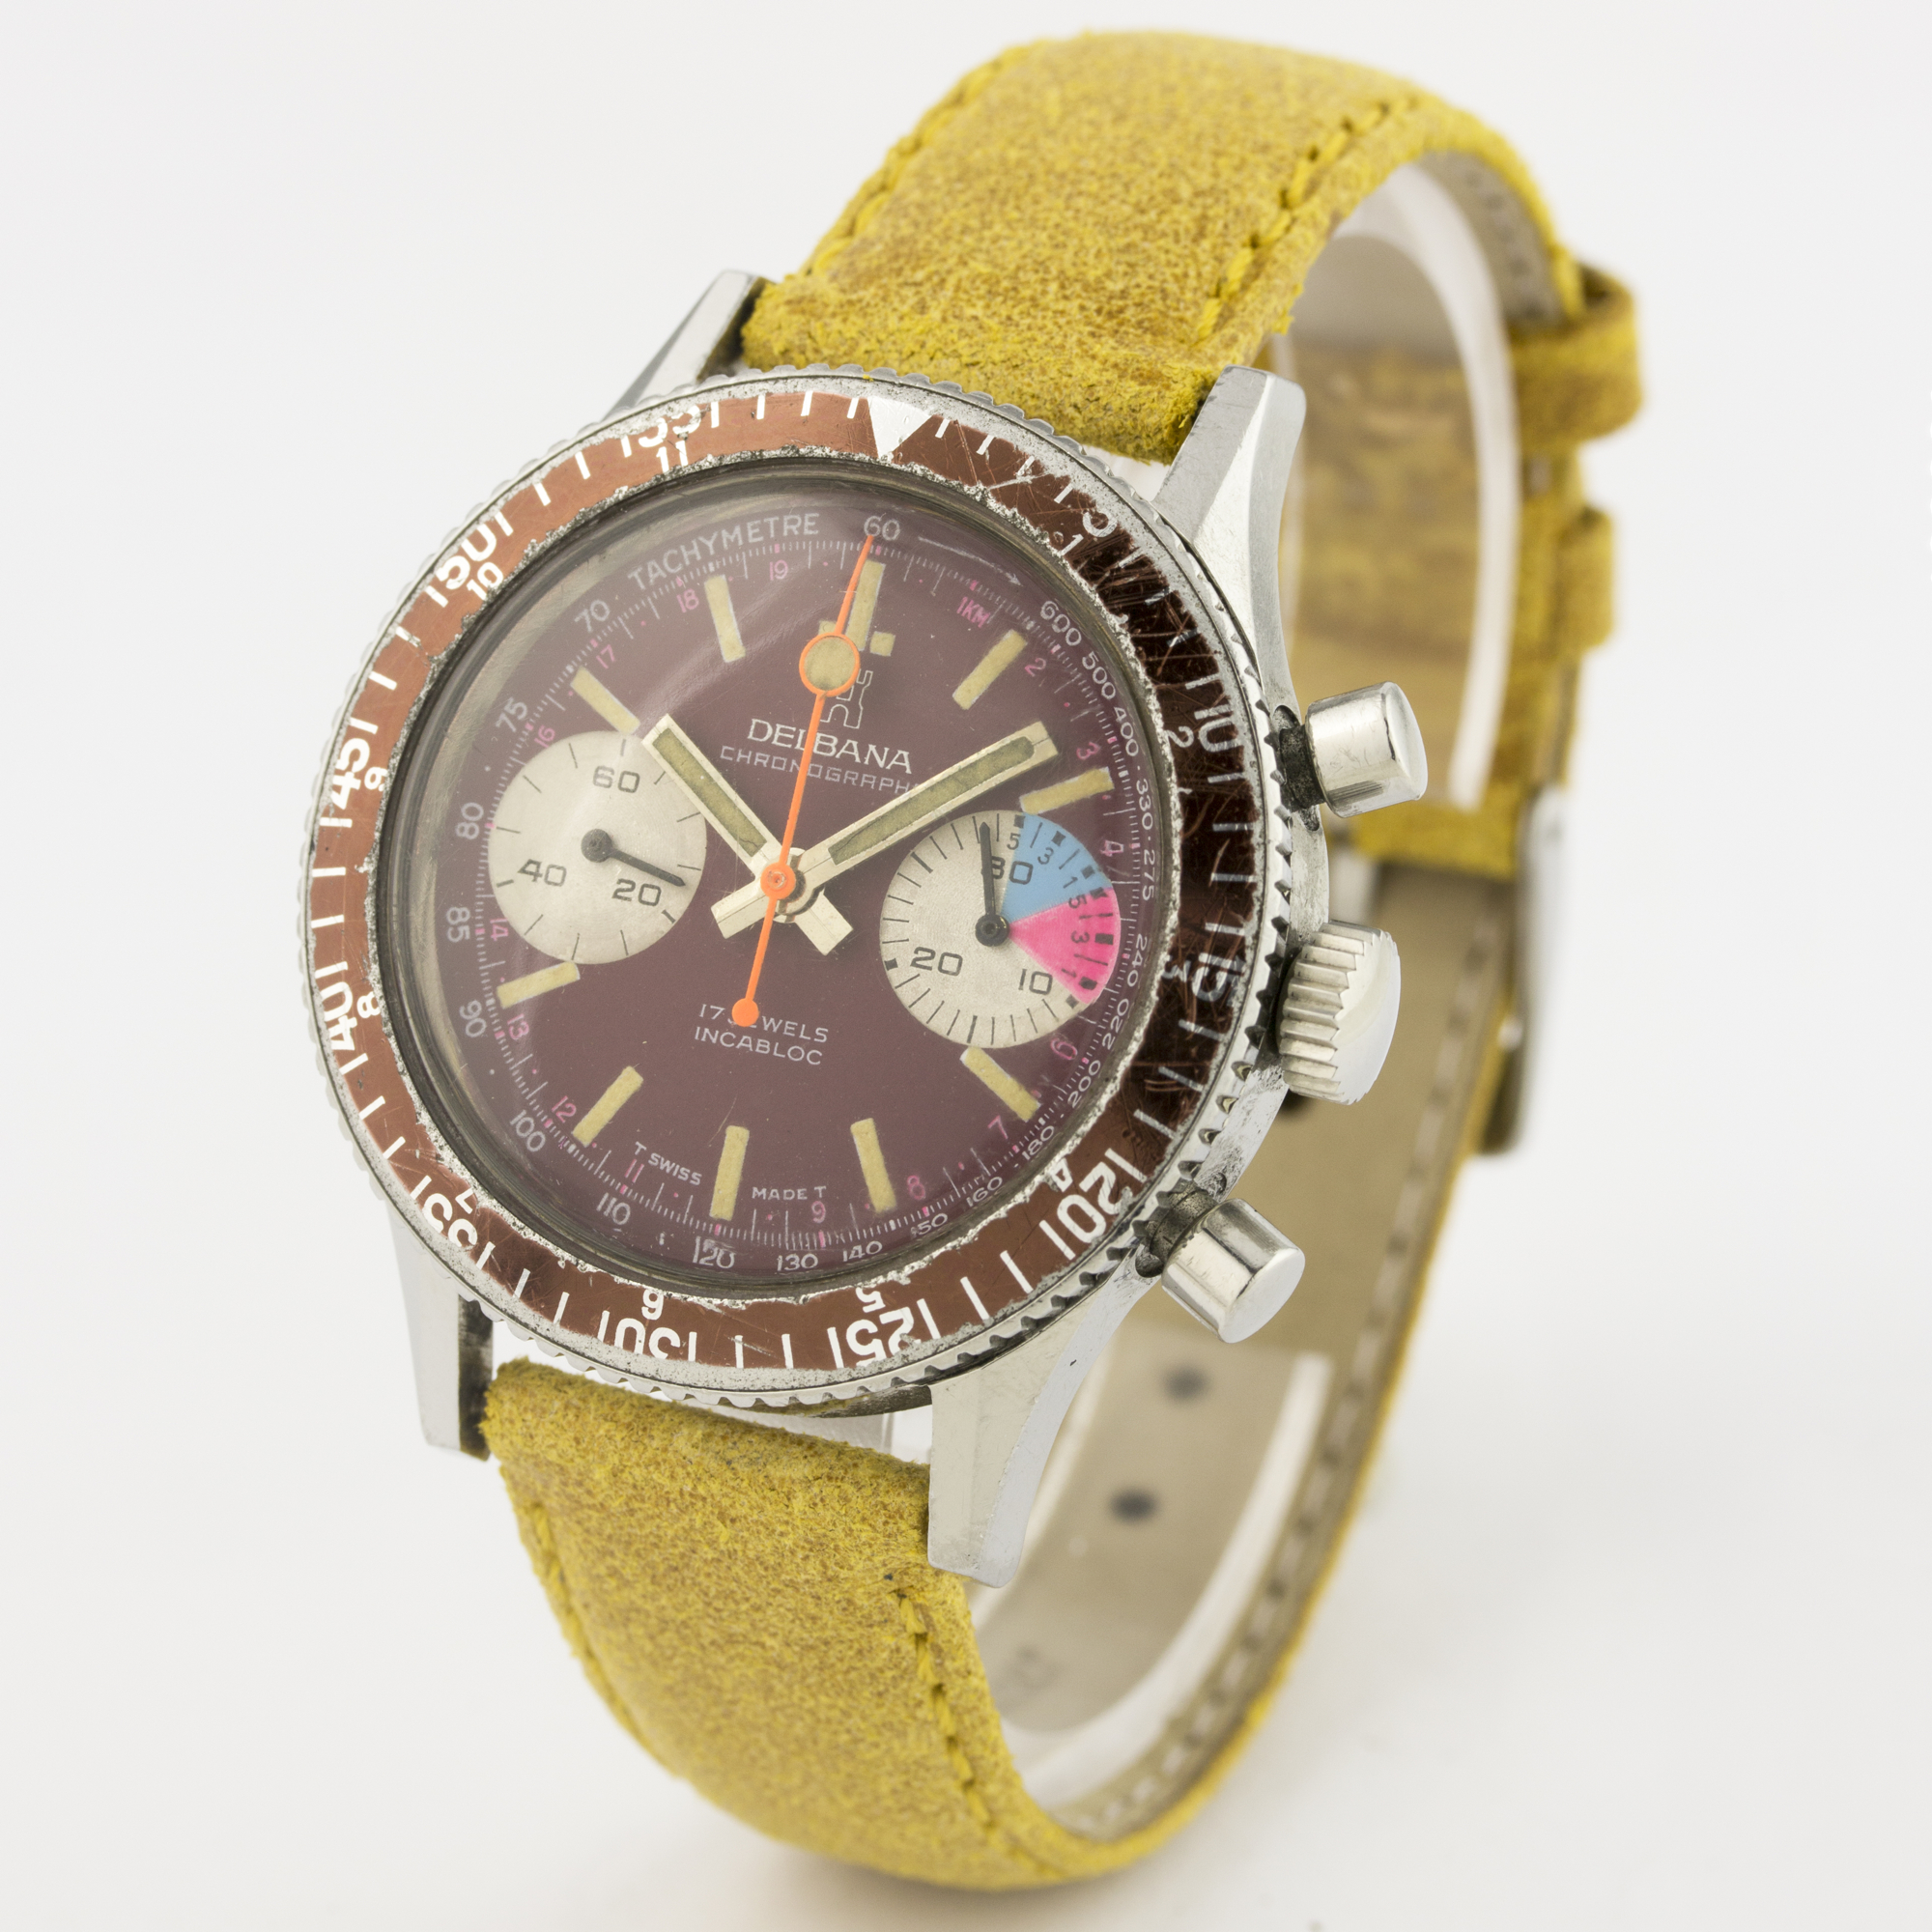 A GENTLEMAN'S STAINLESS STEEL DELBANA YACHTING CHRONOGRAPH WRIST WATCH CIRCA 1970s D: Red dial - Image 3 of 6